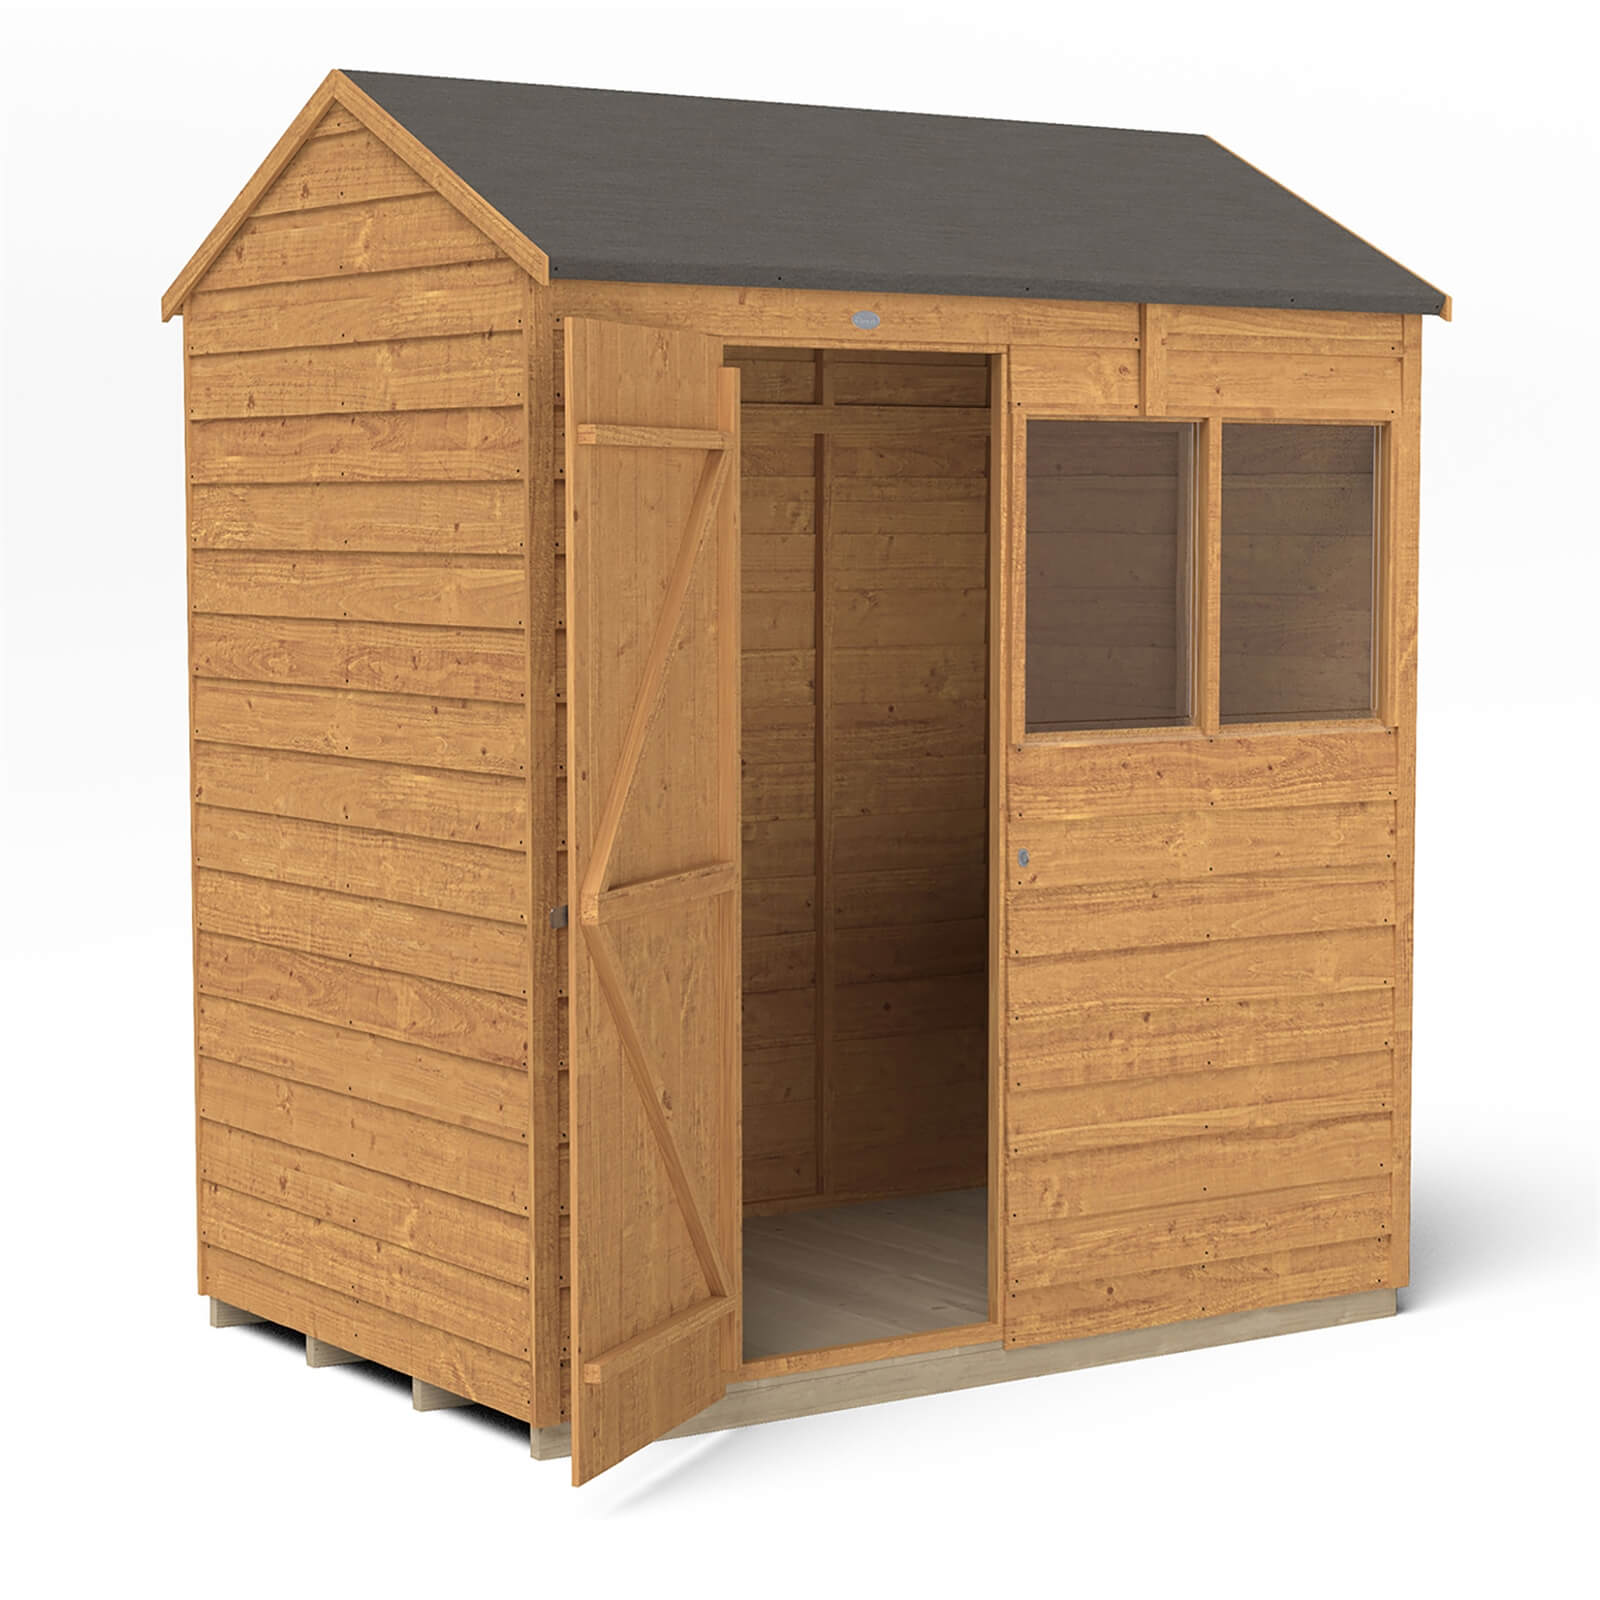 Forest 6 x 4ft Overlap Dip Treated Reverse Apex Shed - Installation Included